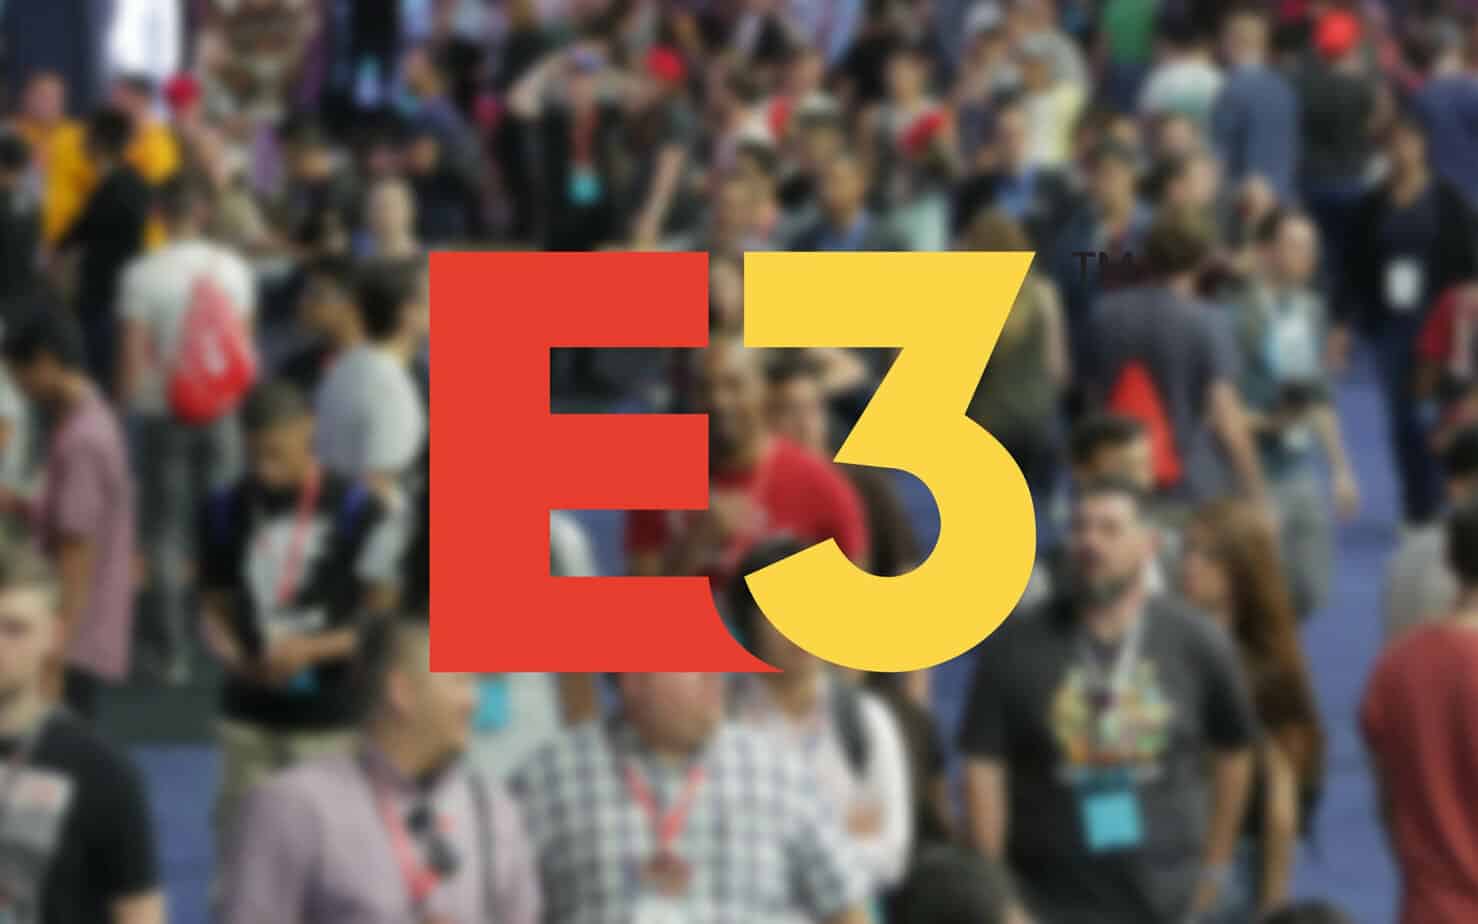 E3 Cancelled? It's Certainly Getting There